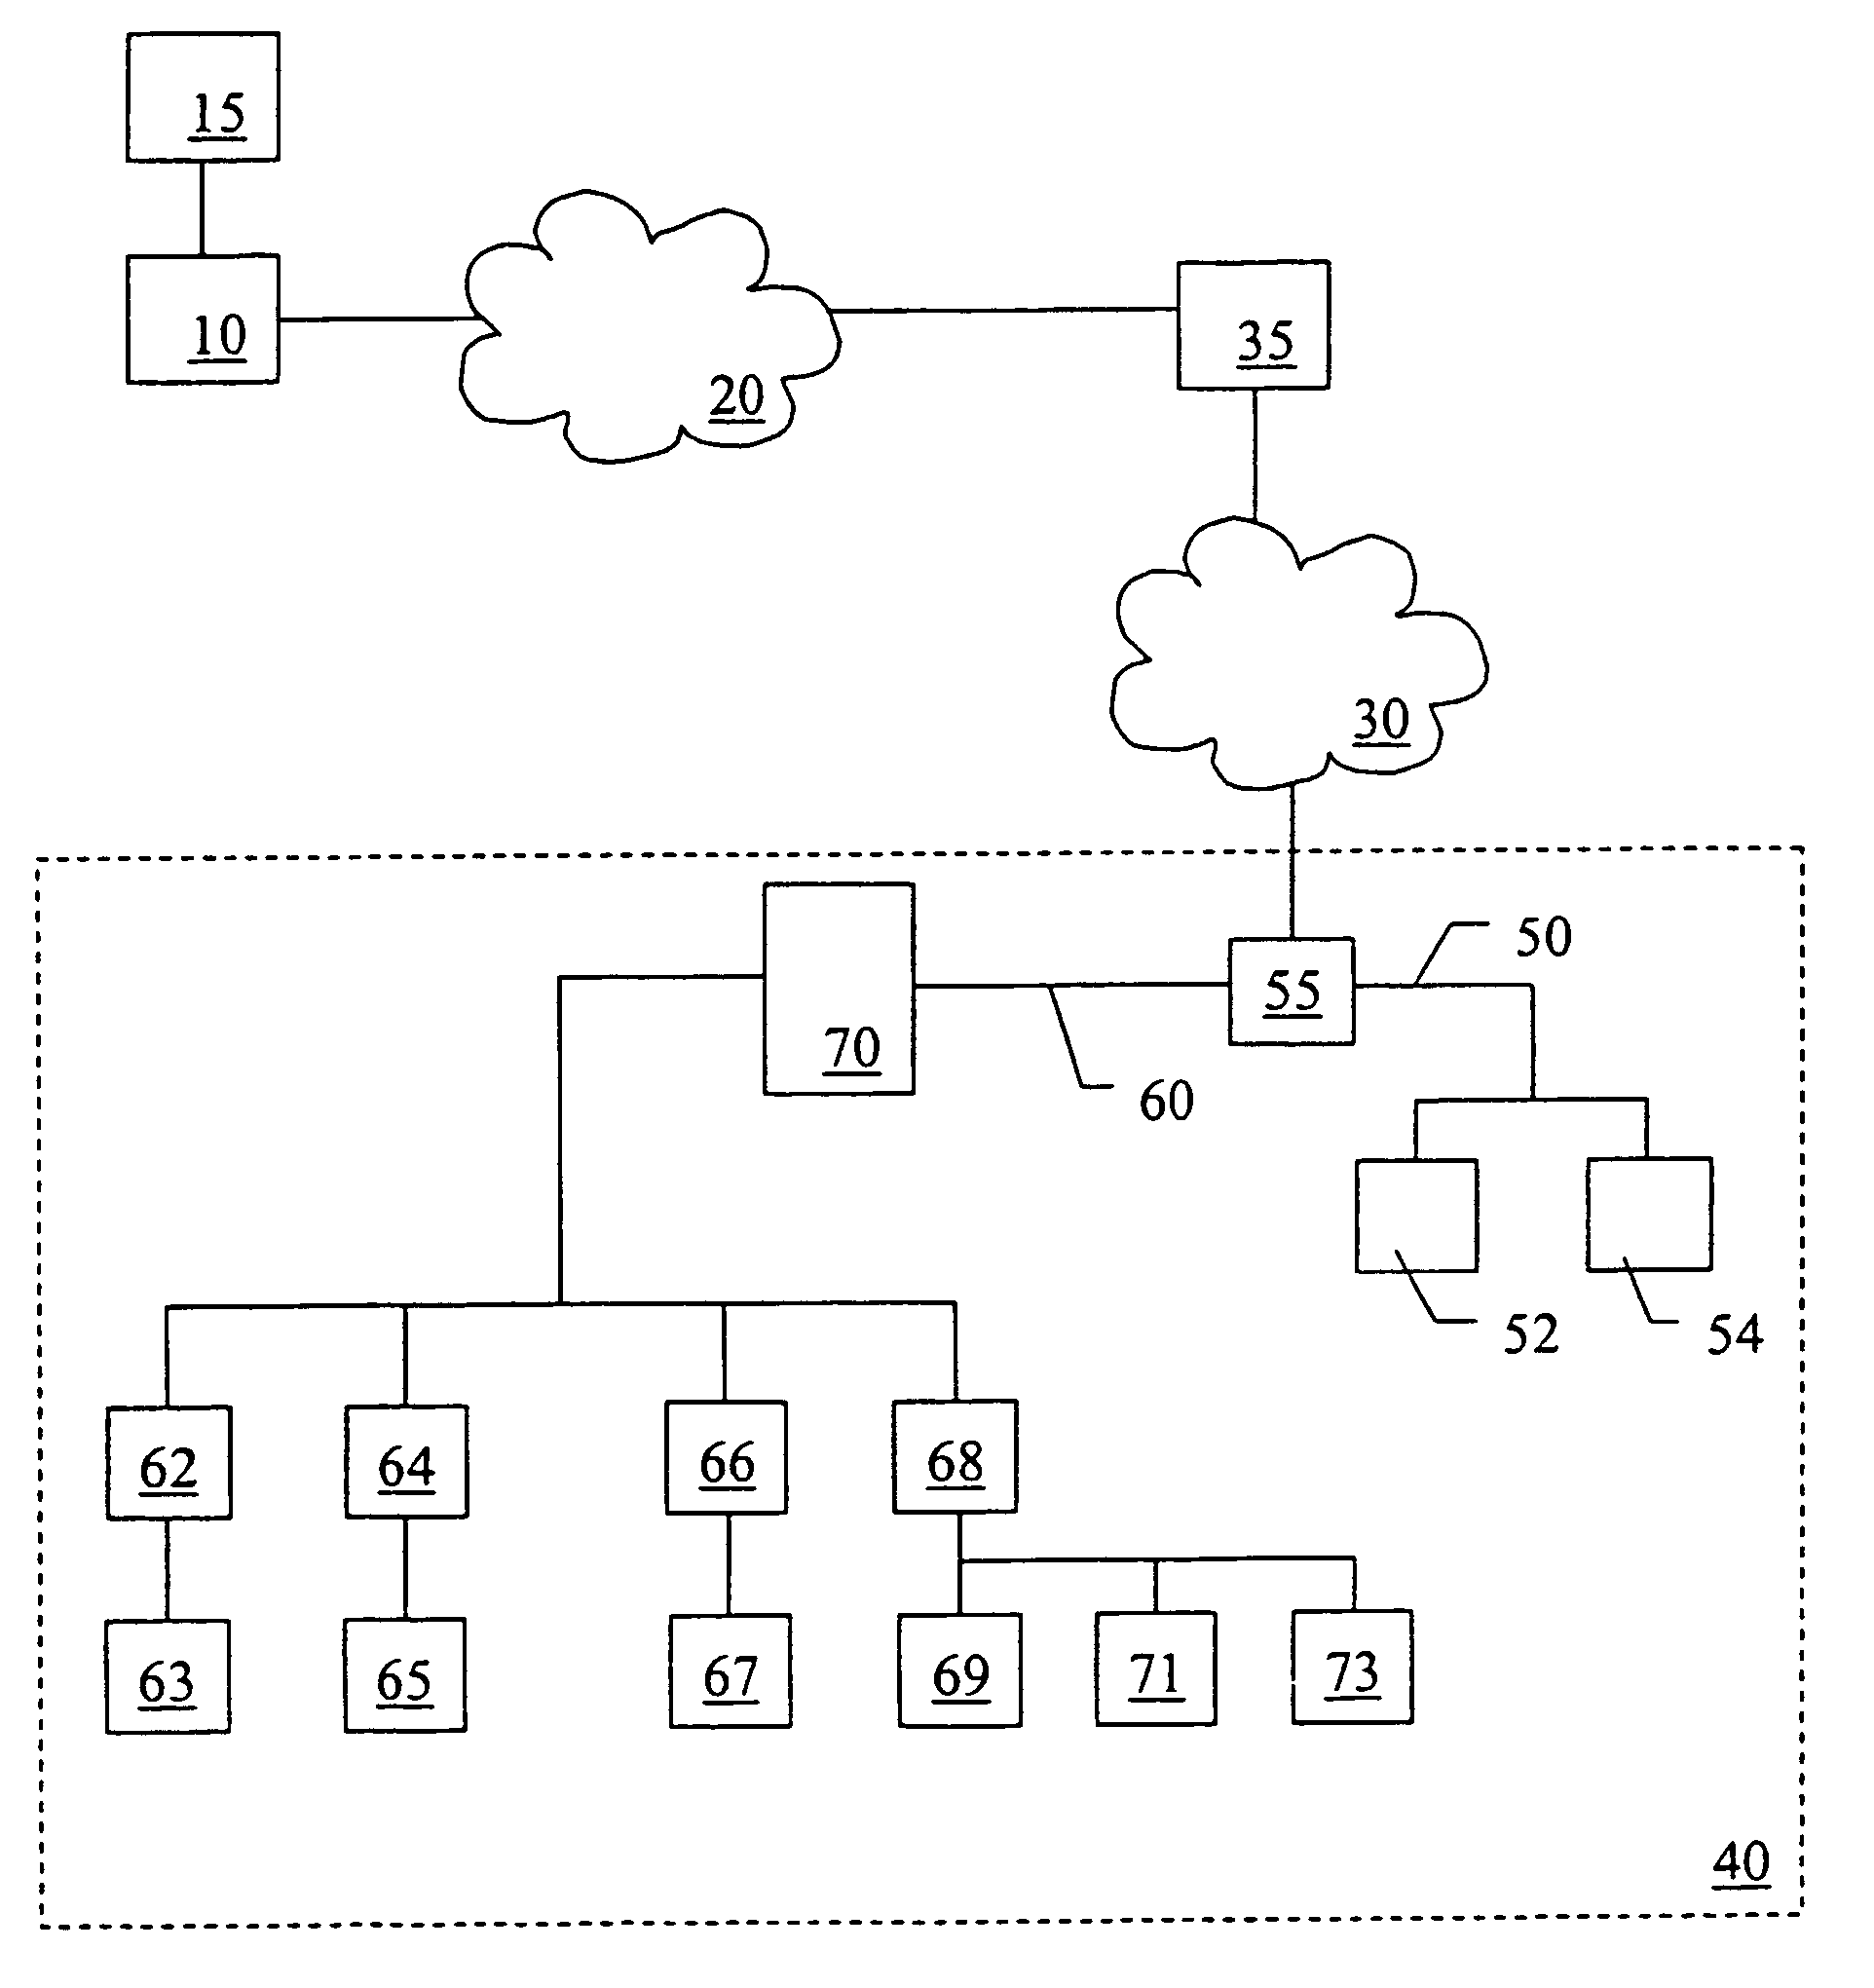 Method and system for control and maintenance of residential service networks